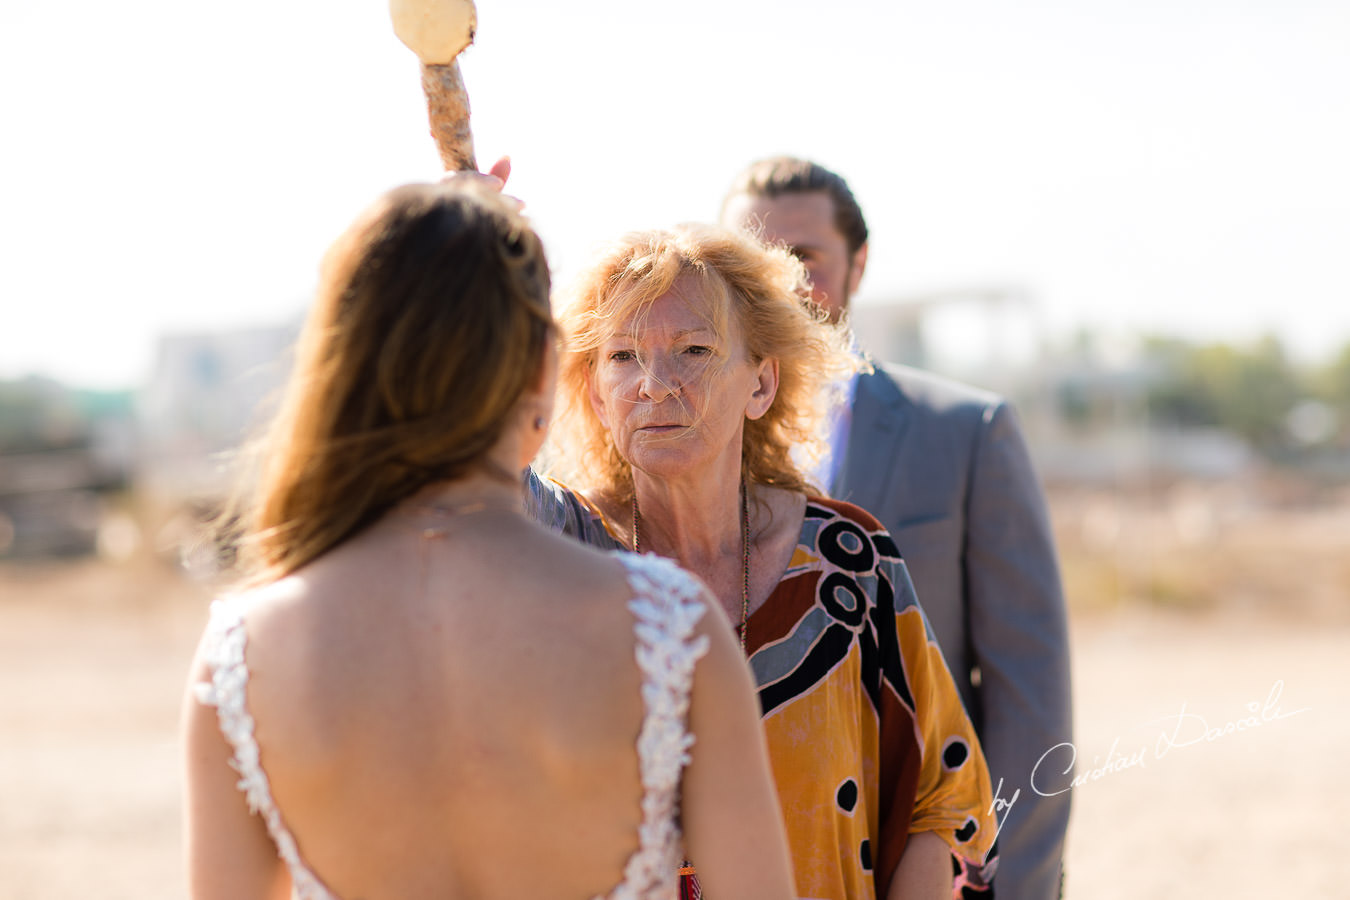 The shaman blessing the bride, moments captured by Cyprus Wedding Photographer Cristian Dascalu.